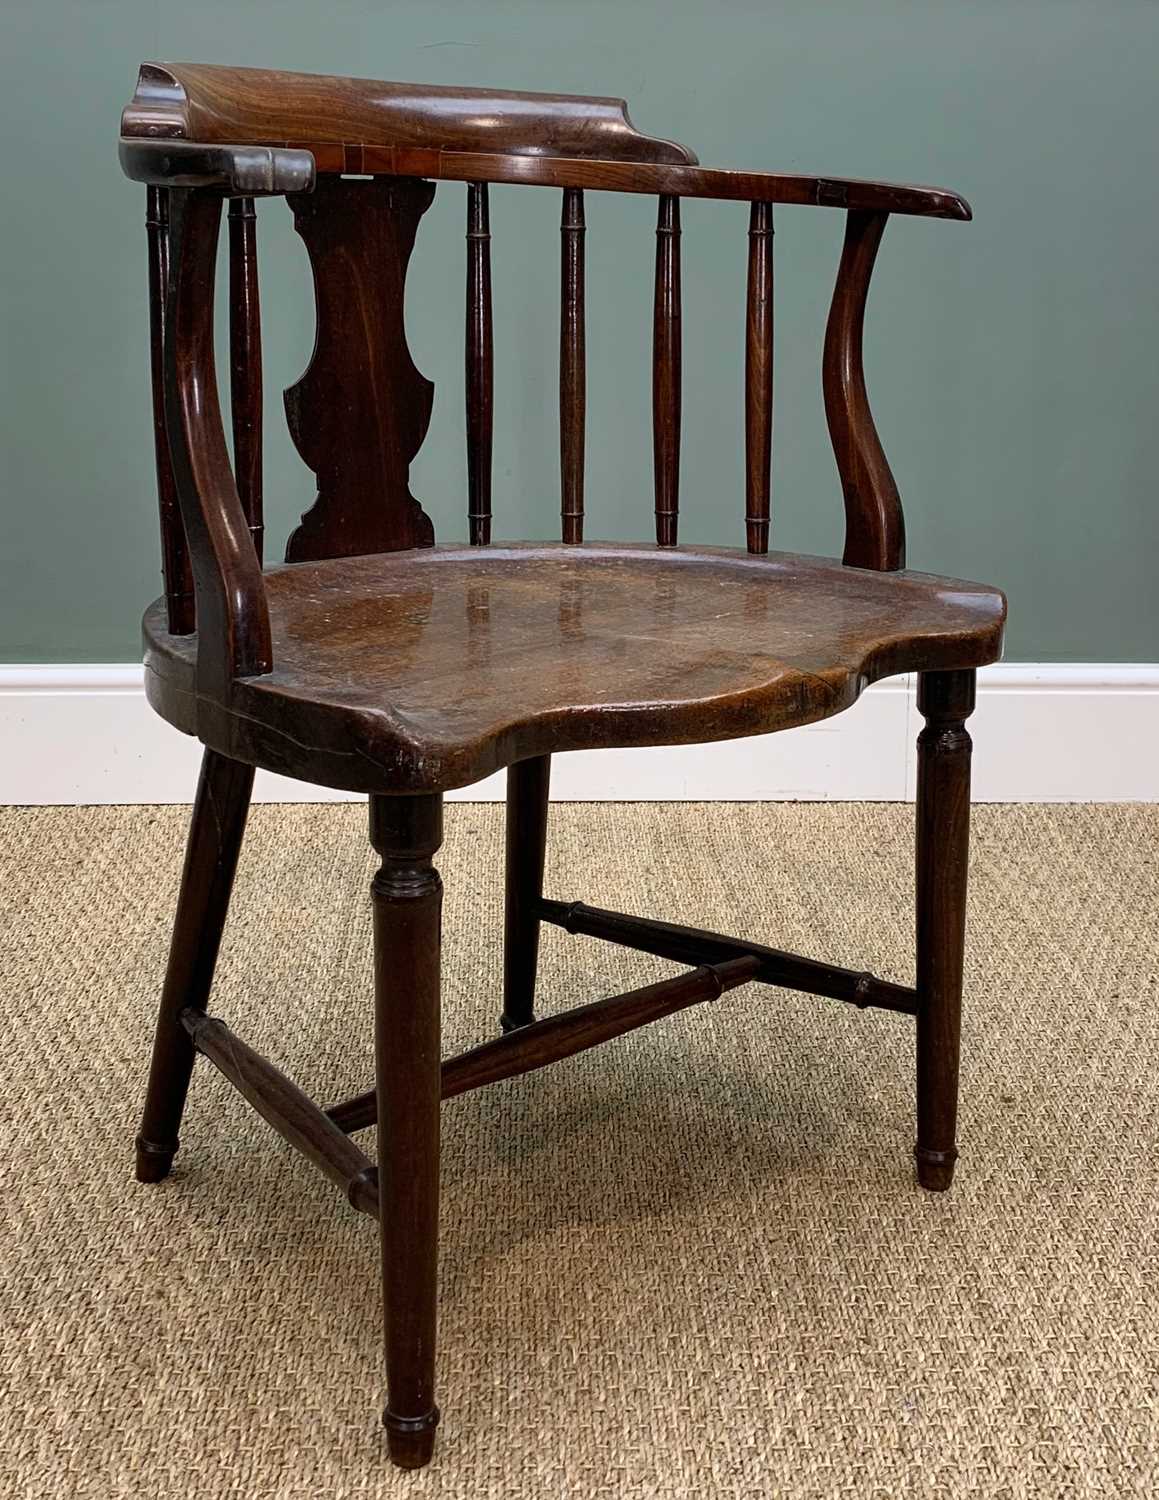 COLLECTION OF ANTIQUE CHAIRS including, mahogany horseshoe chair, oak ladderback, Jacobean style oak - Image 2 of 8